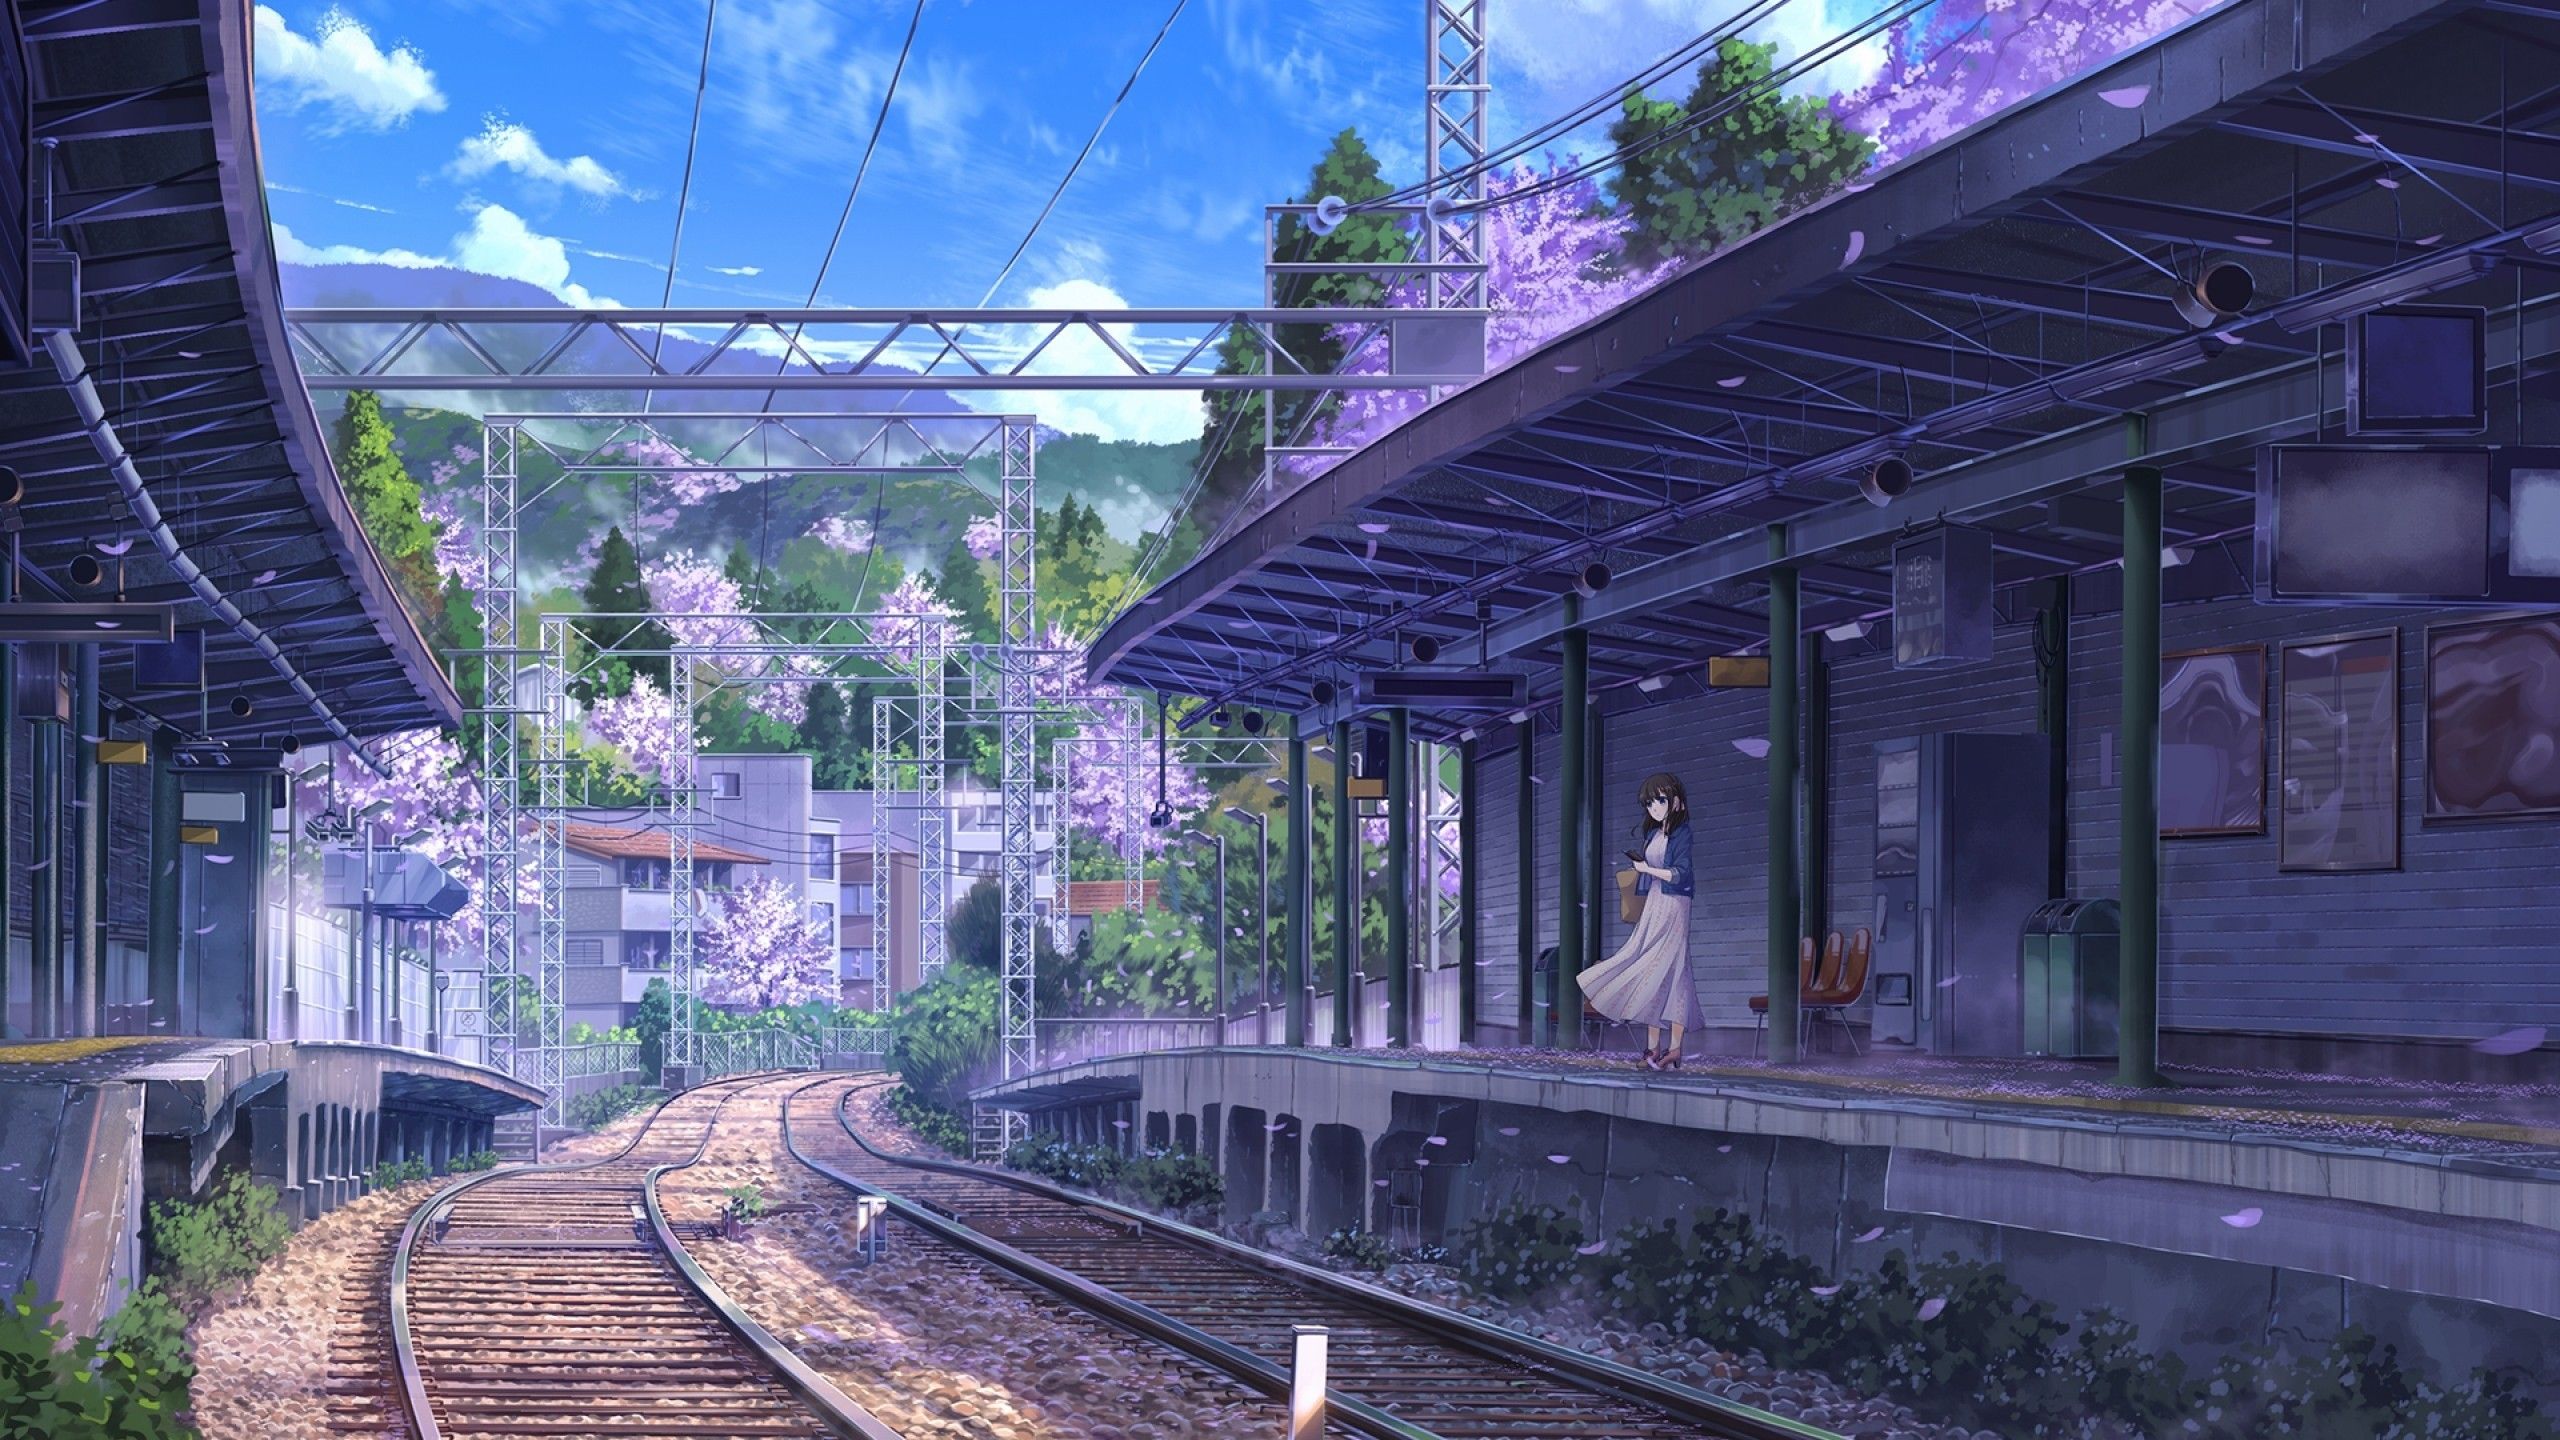 Download 2560x1440 Anime Tran Station, Woman, Scenic, Trees